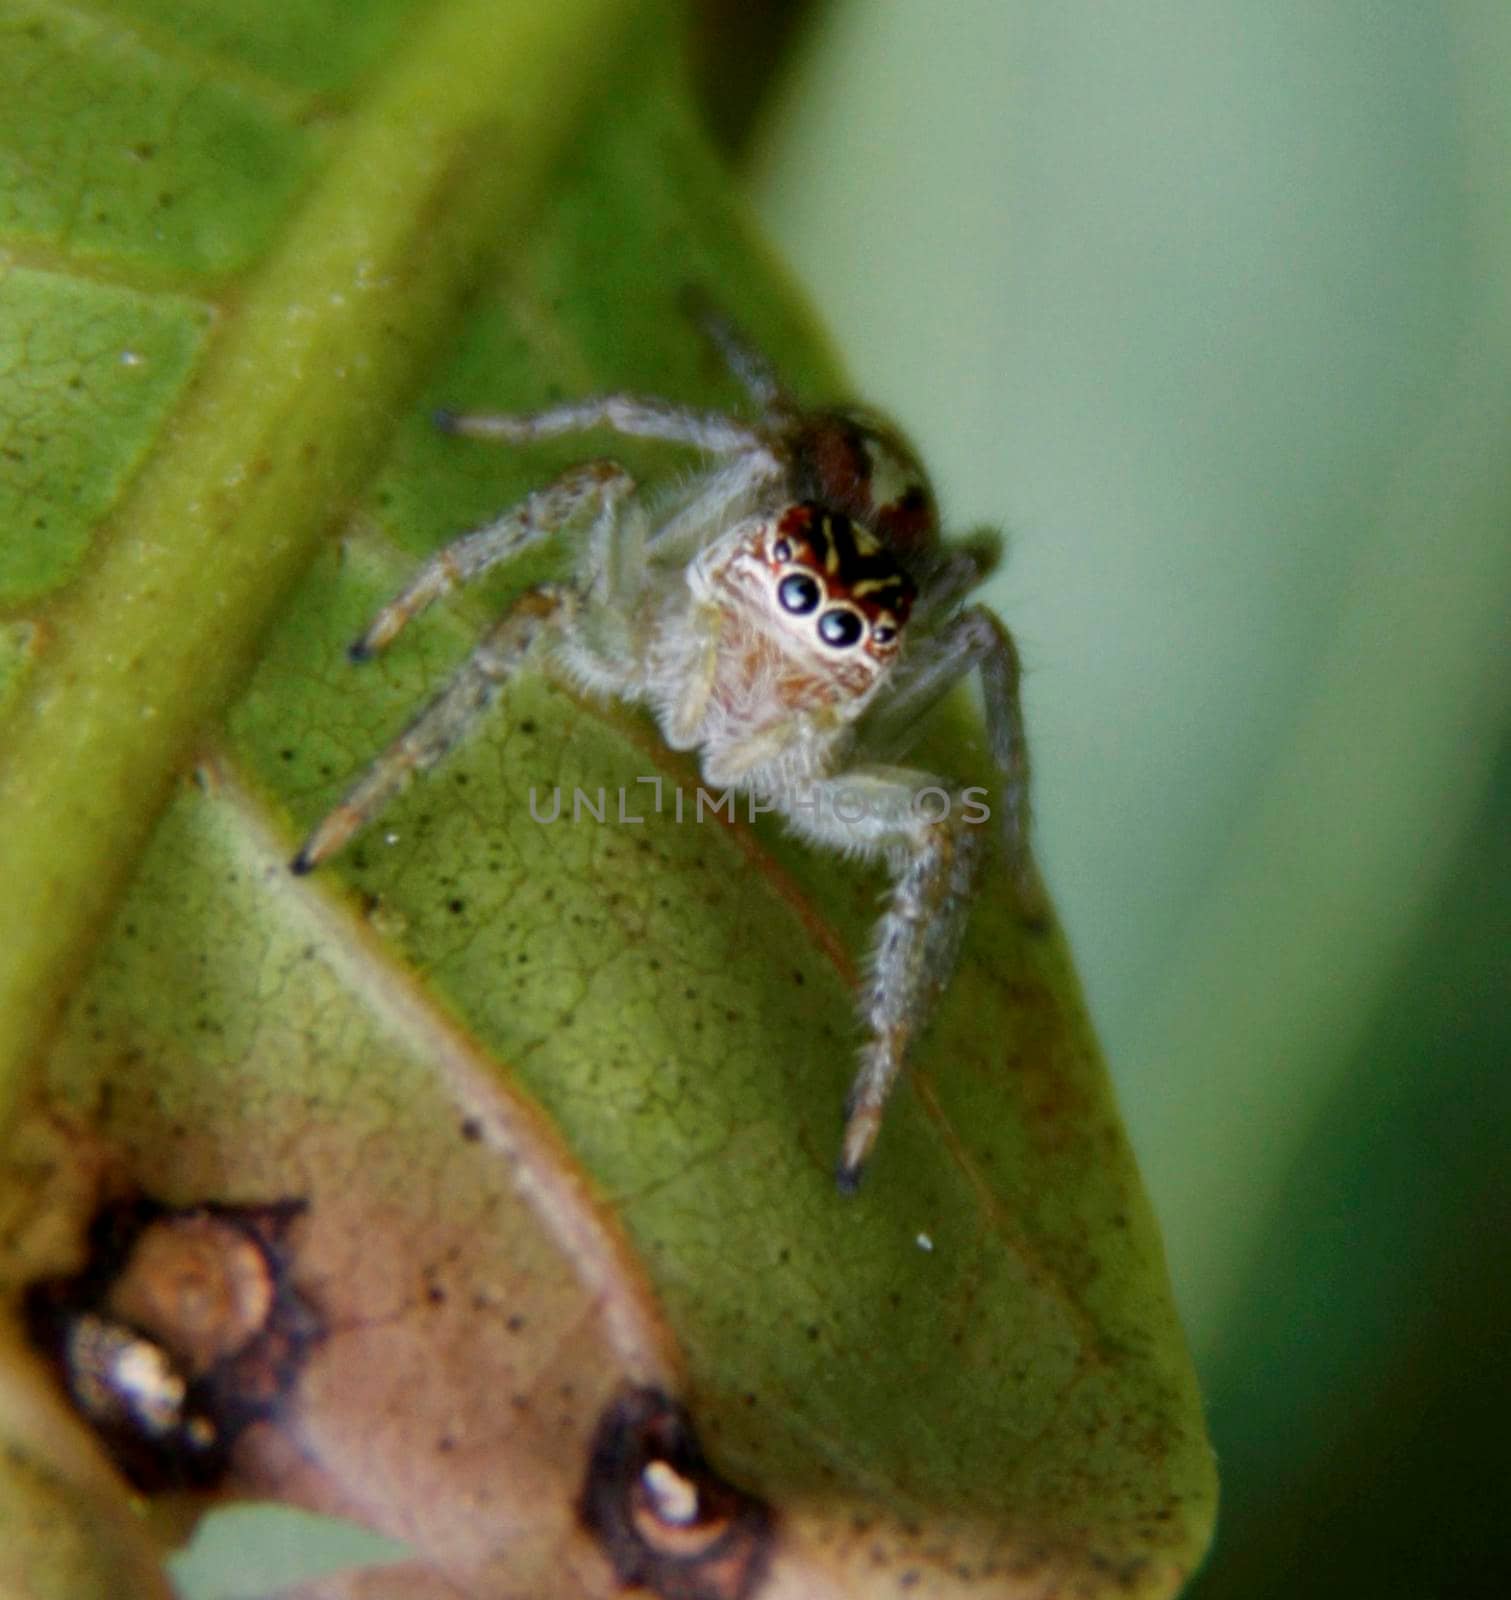 conde, bahia / brazil - july 26, 2014: Spider is seen in garden in the city of Conde.